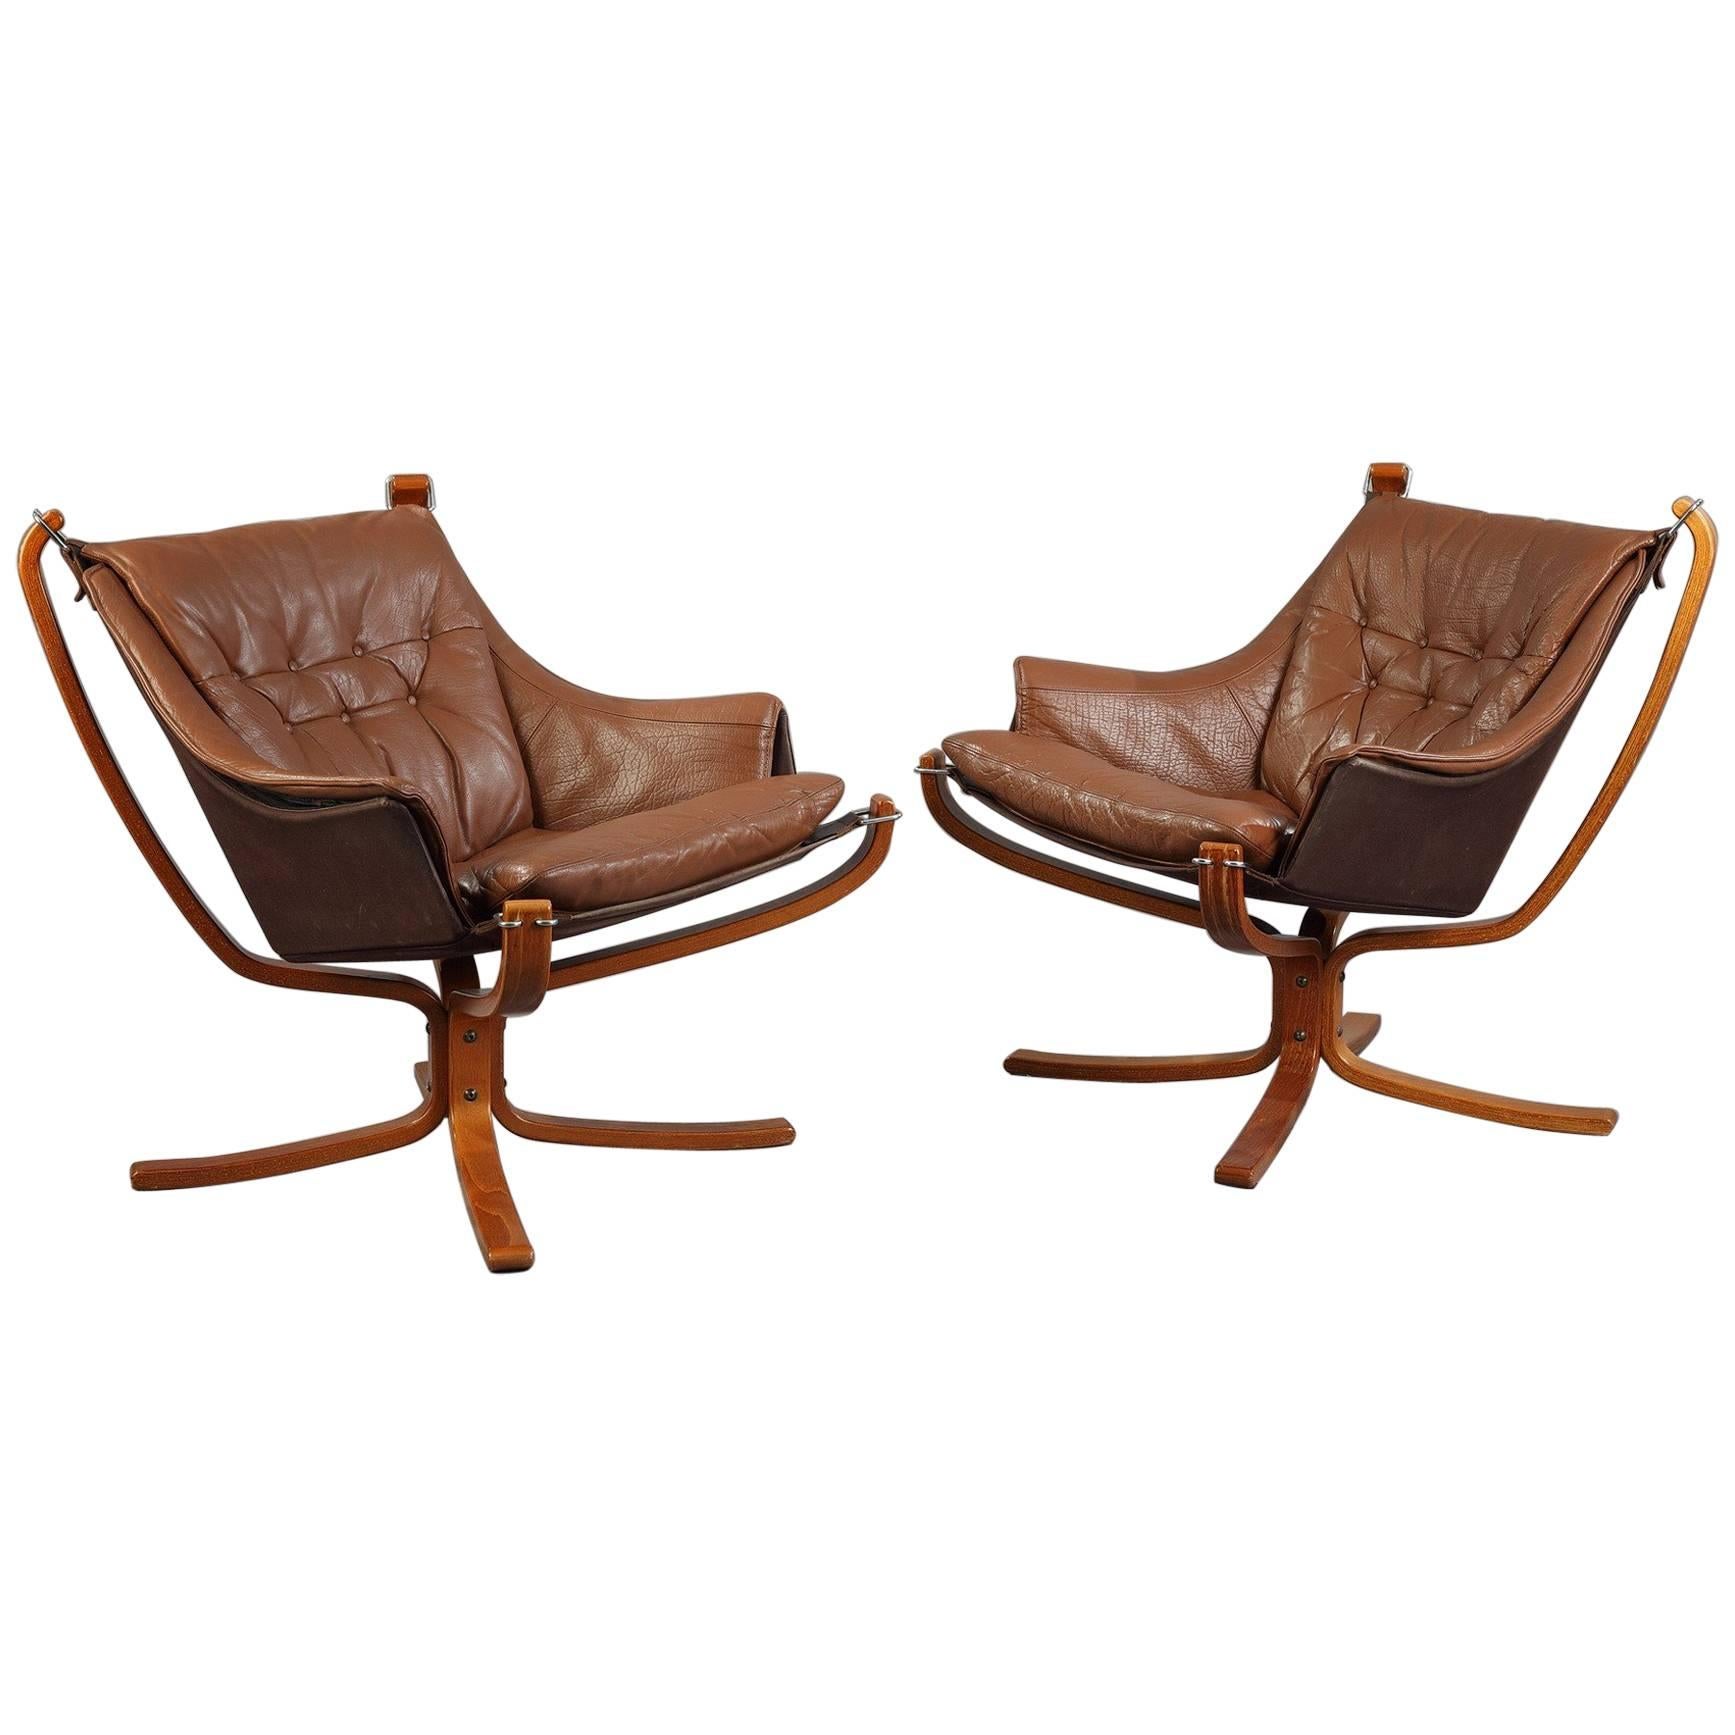 Late 20th Century Pair of "Falcon" Armchairs by Sigurd Ressell for Vatne Möbler